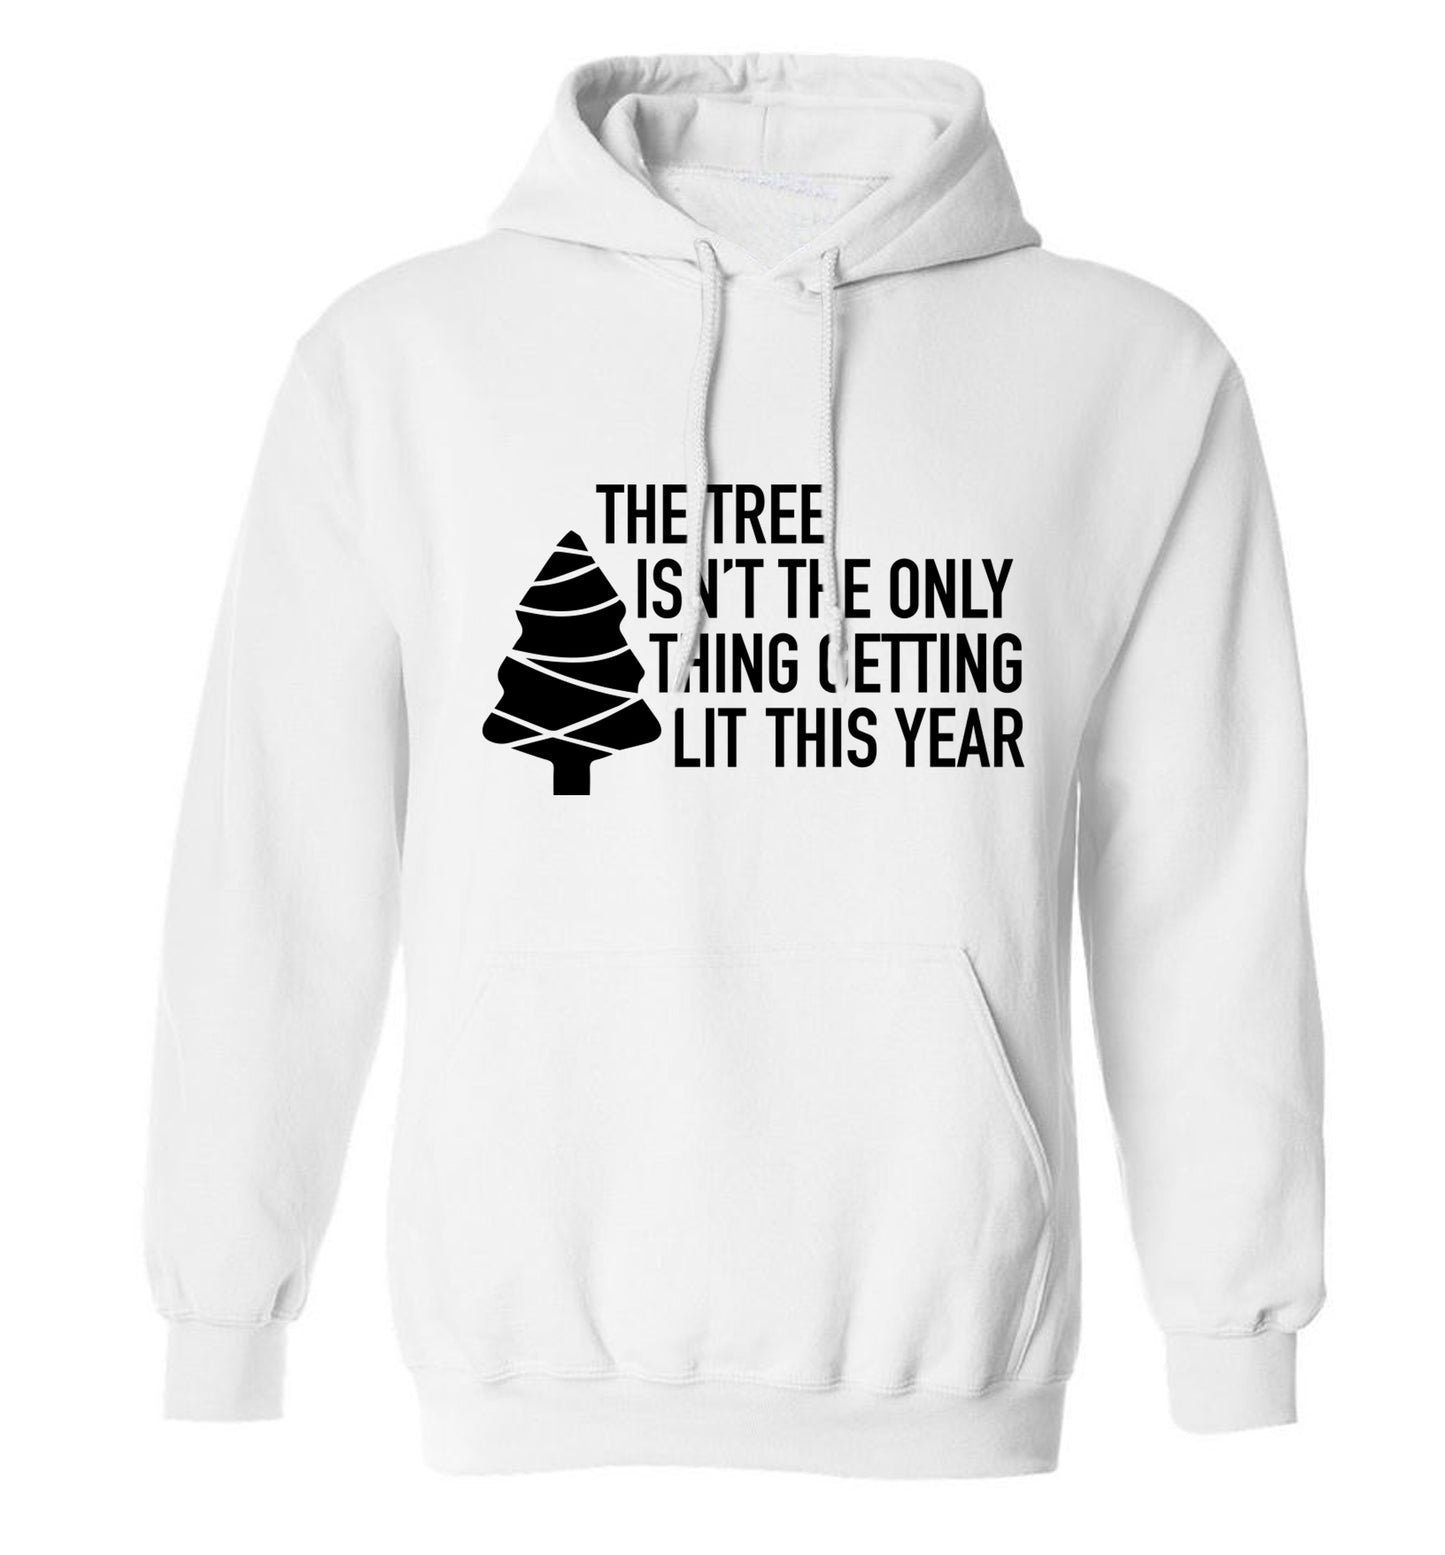 The tree isn't the only thing getting lit this year adults unisex white hoodie 2XL